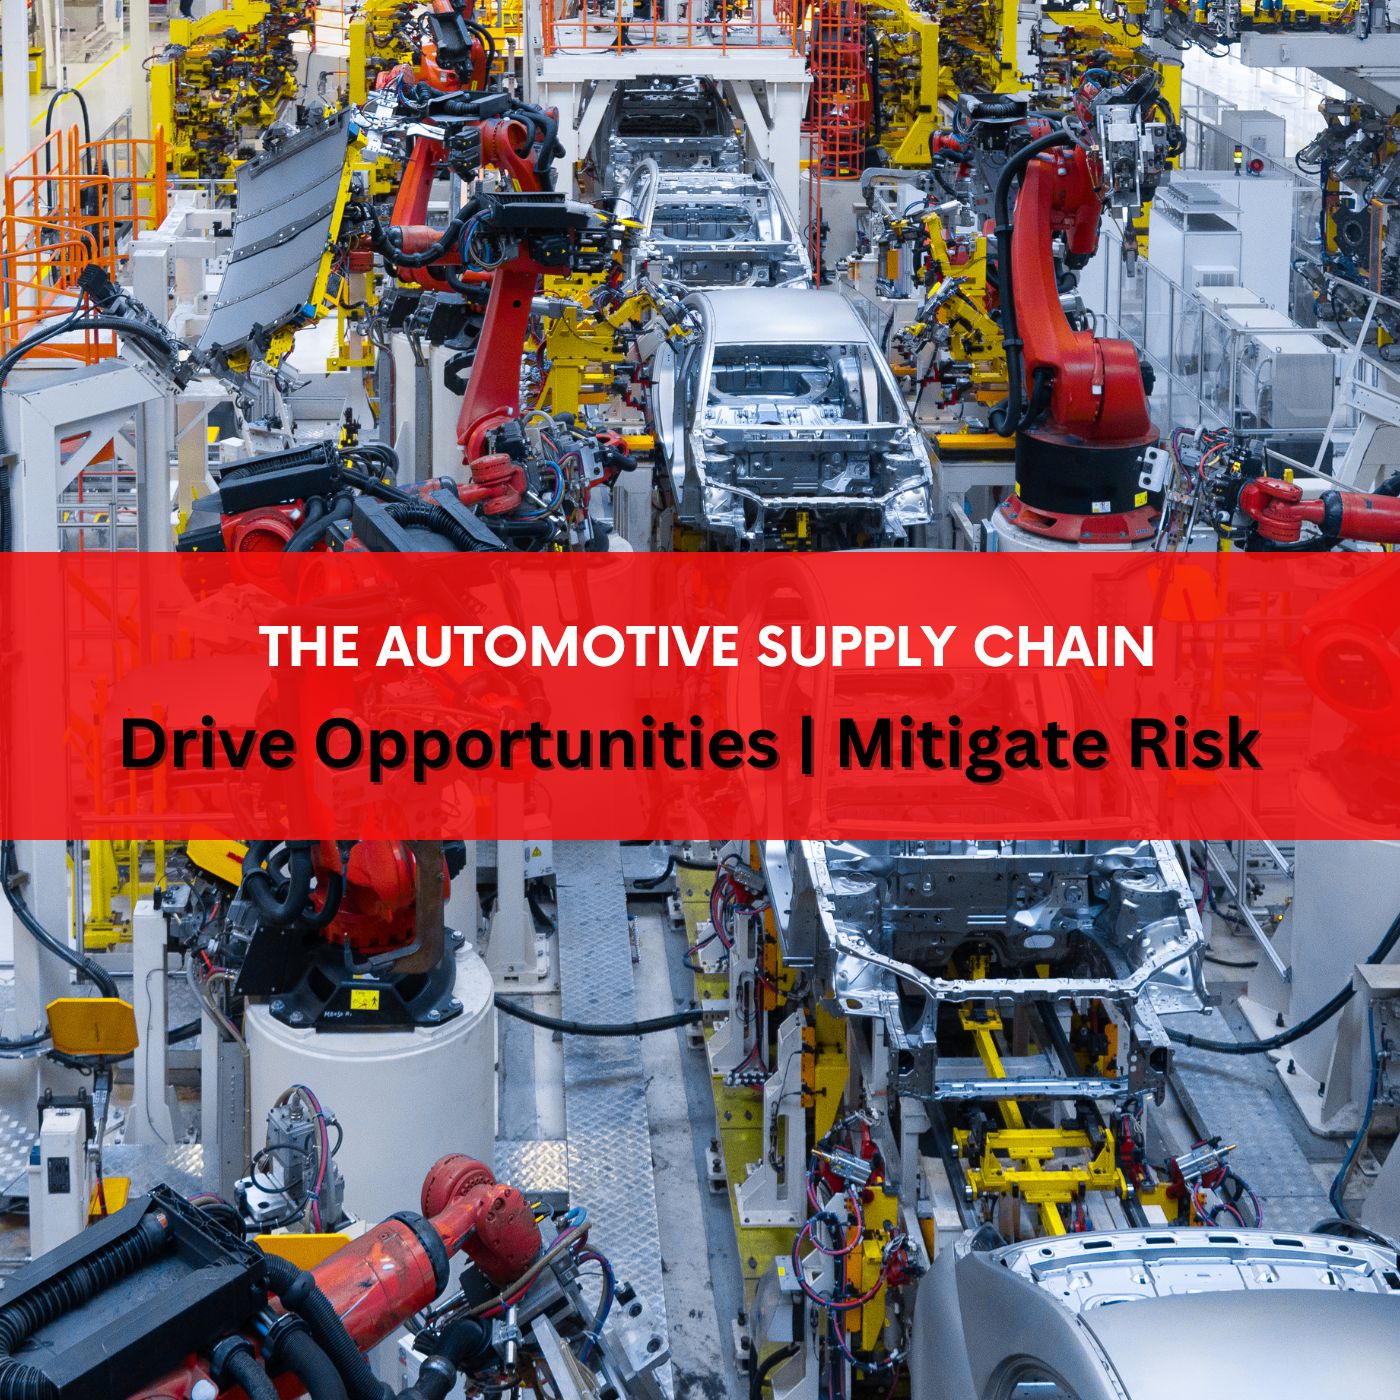 Episode #33: Driving Opportunities | Mitigating Risk in the Automotive Supply Chain